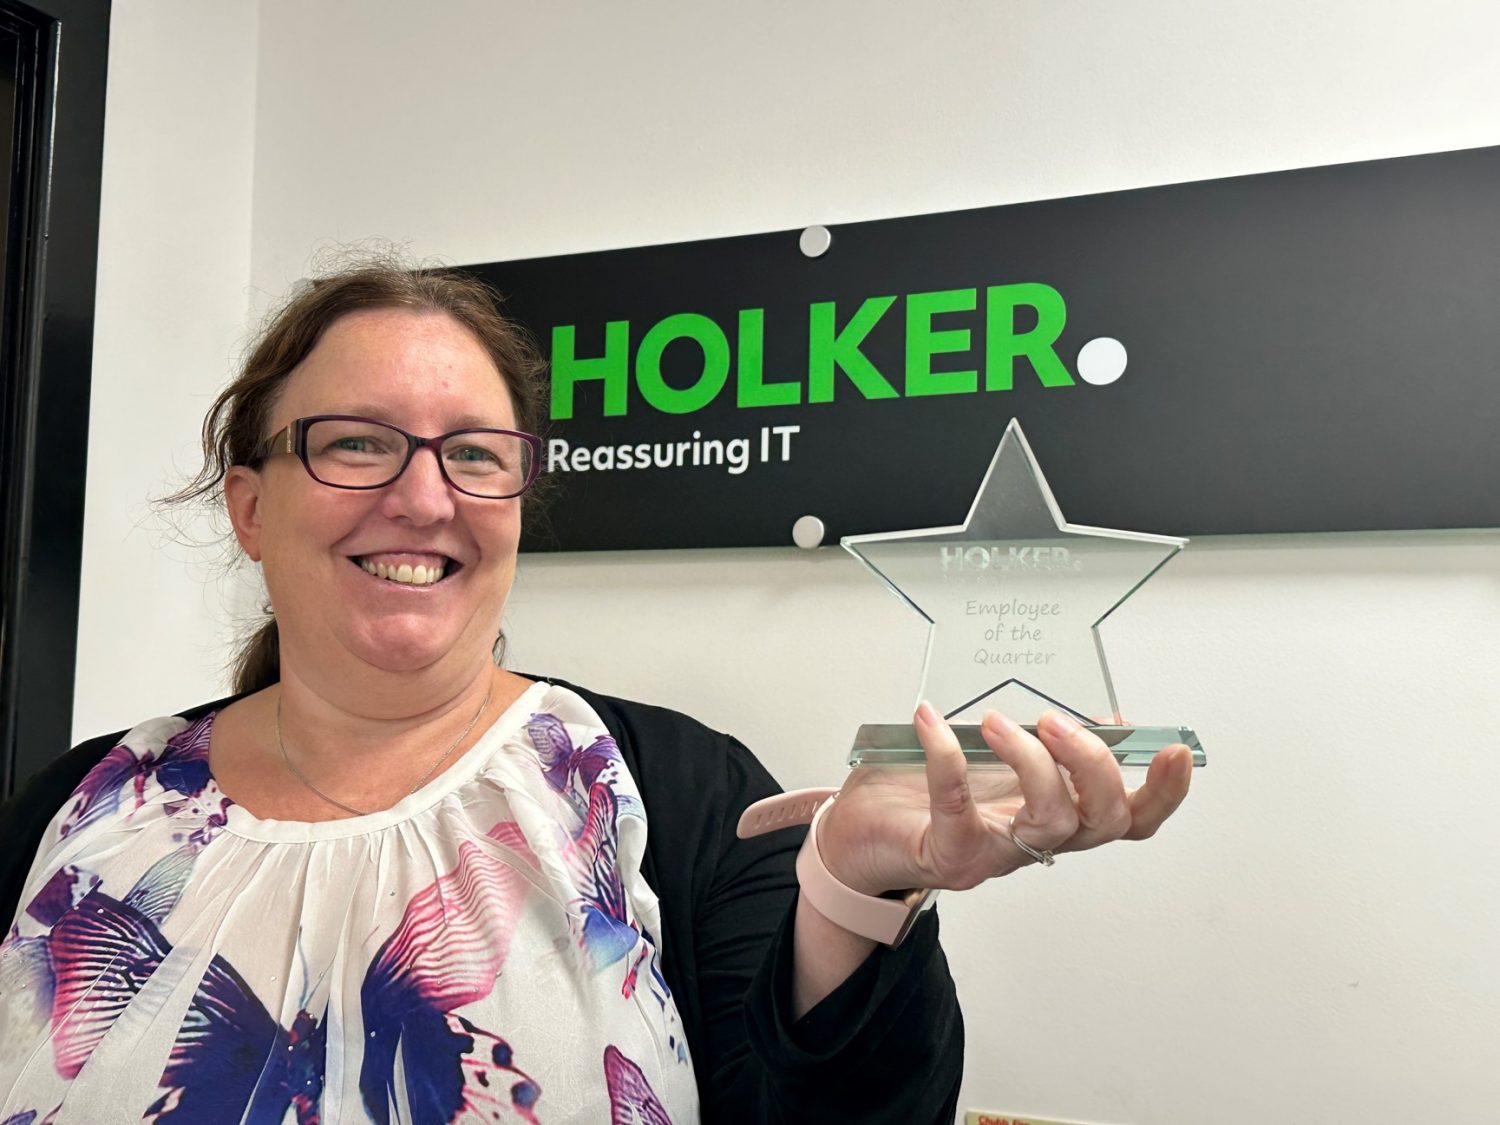 Fantastic team player named in. Holker IT’s latest employee awards